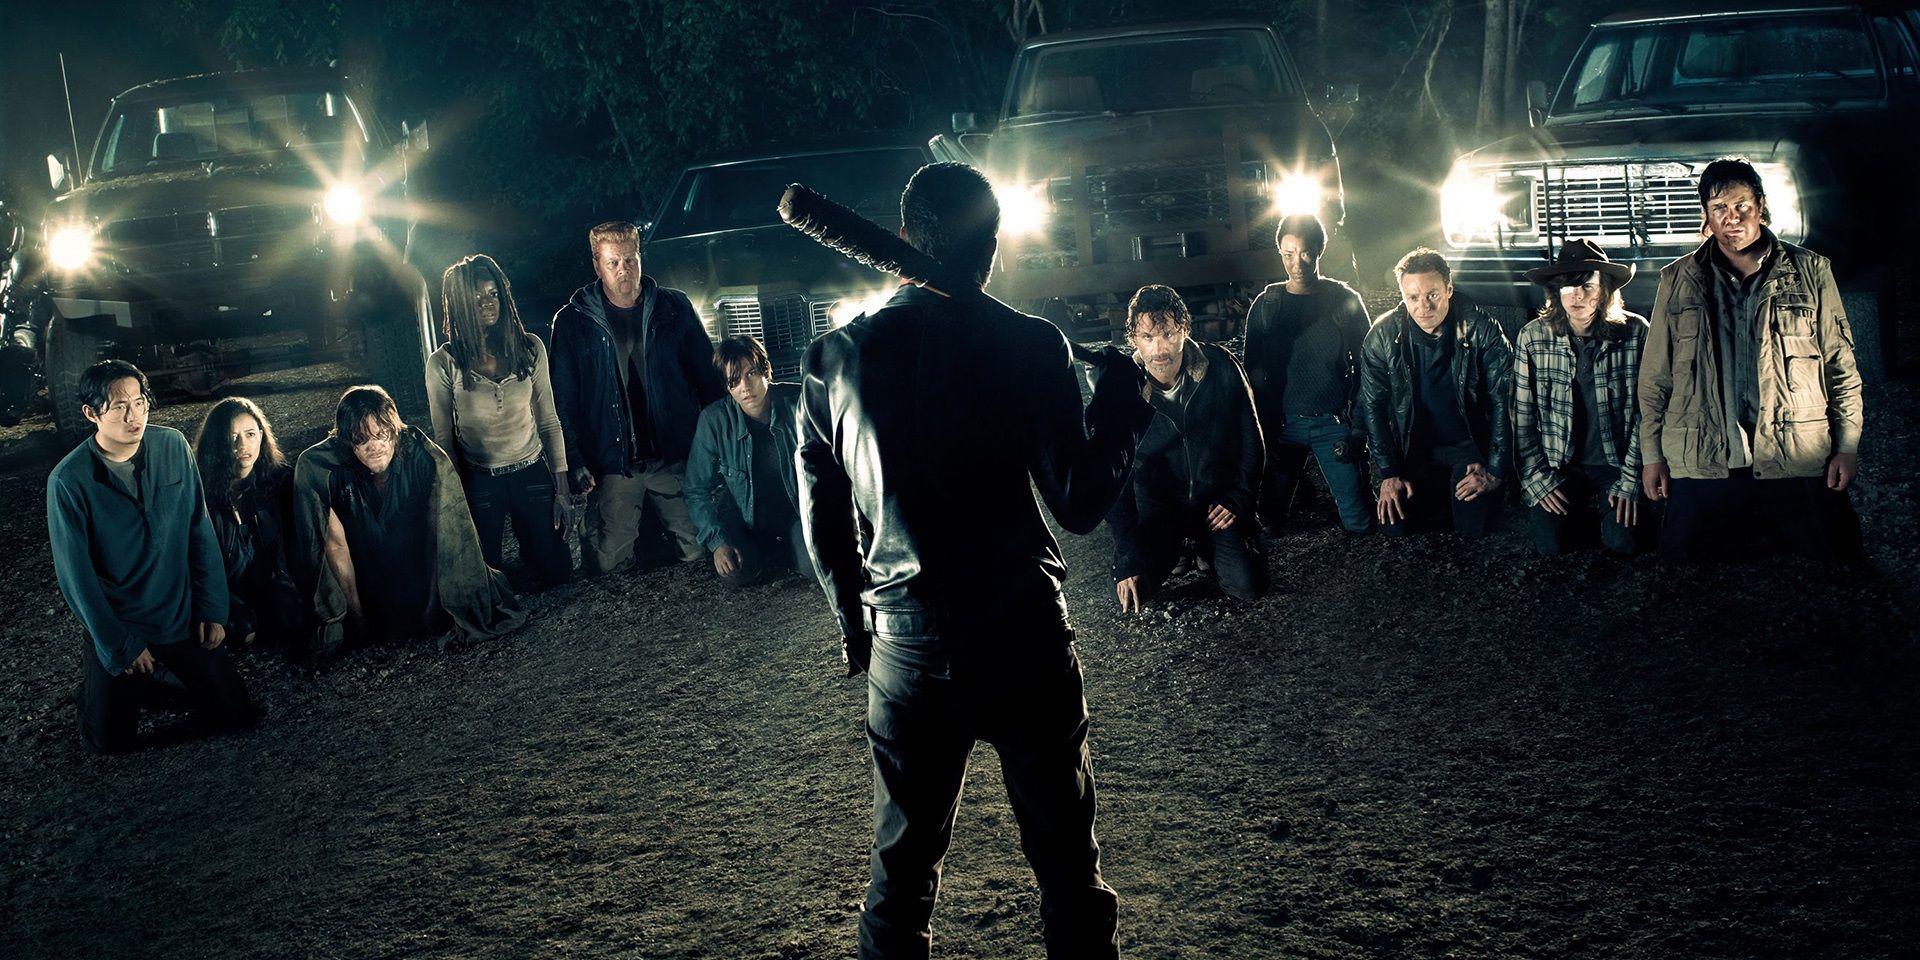 Negan lines up Rick's group in The Walking Dead